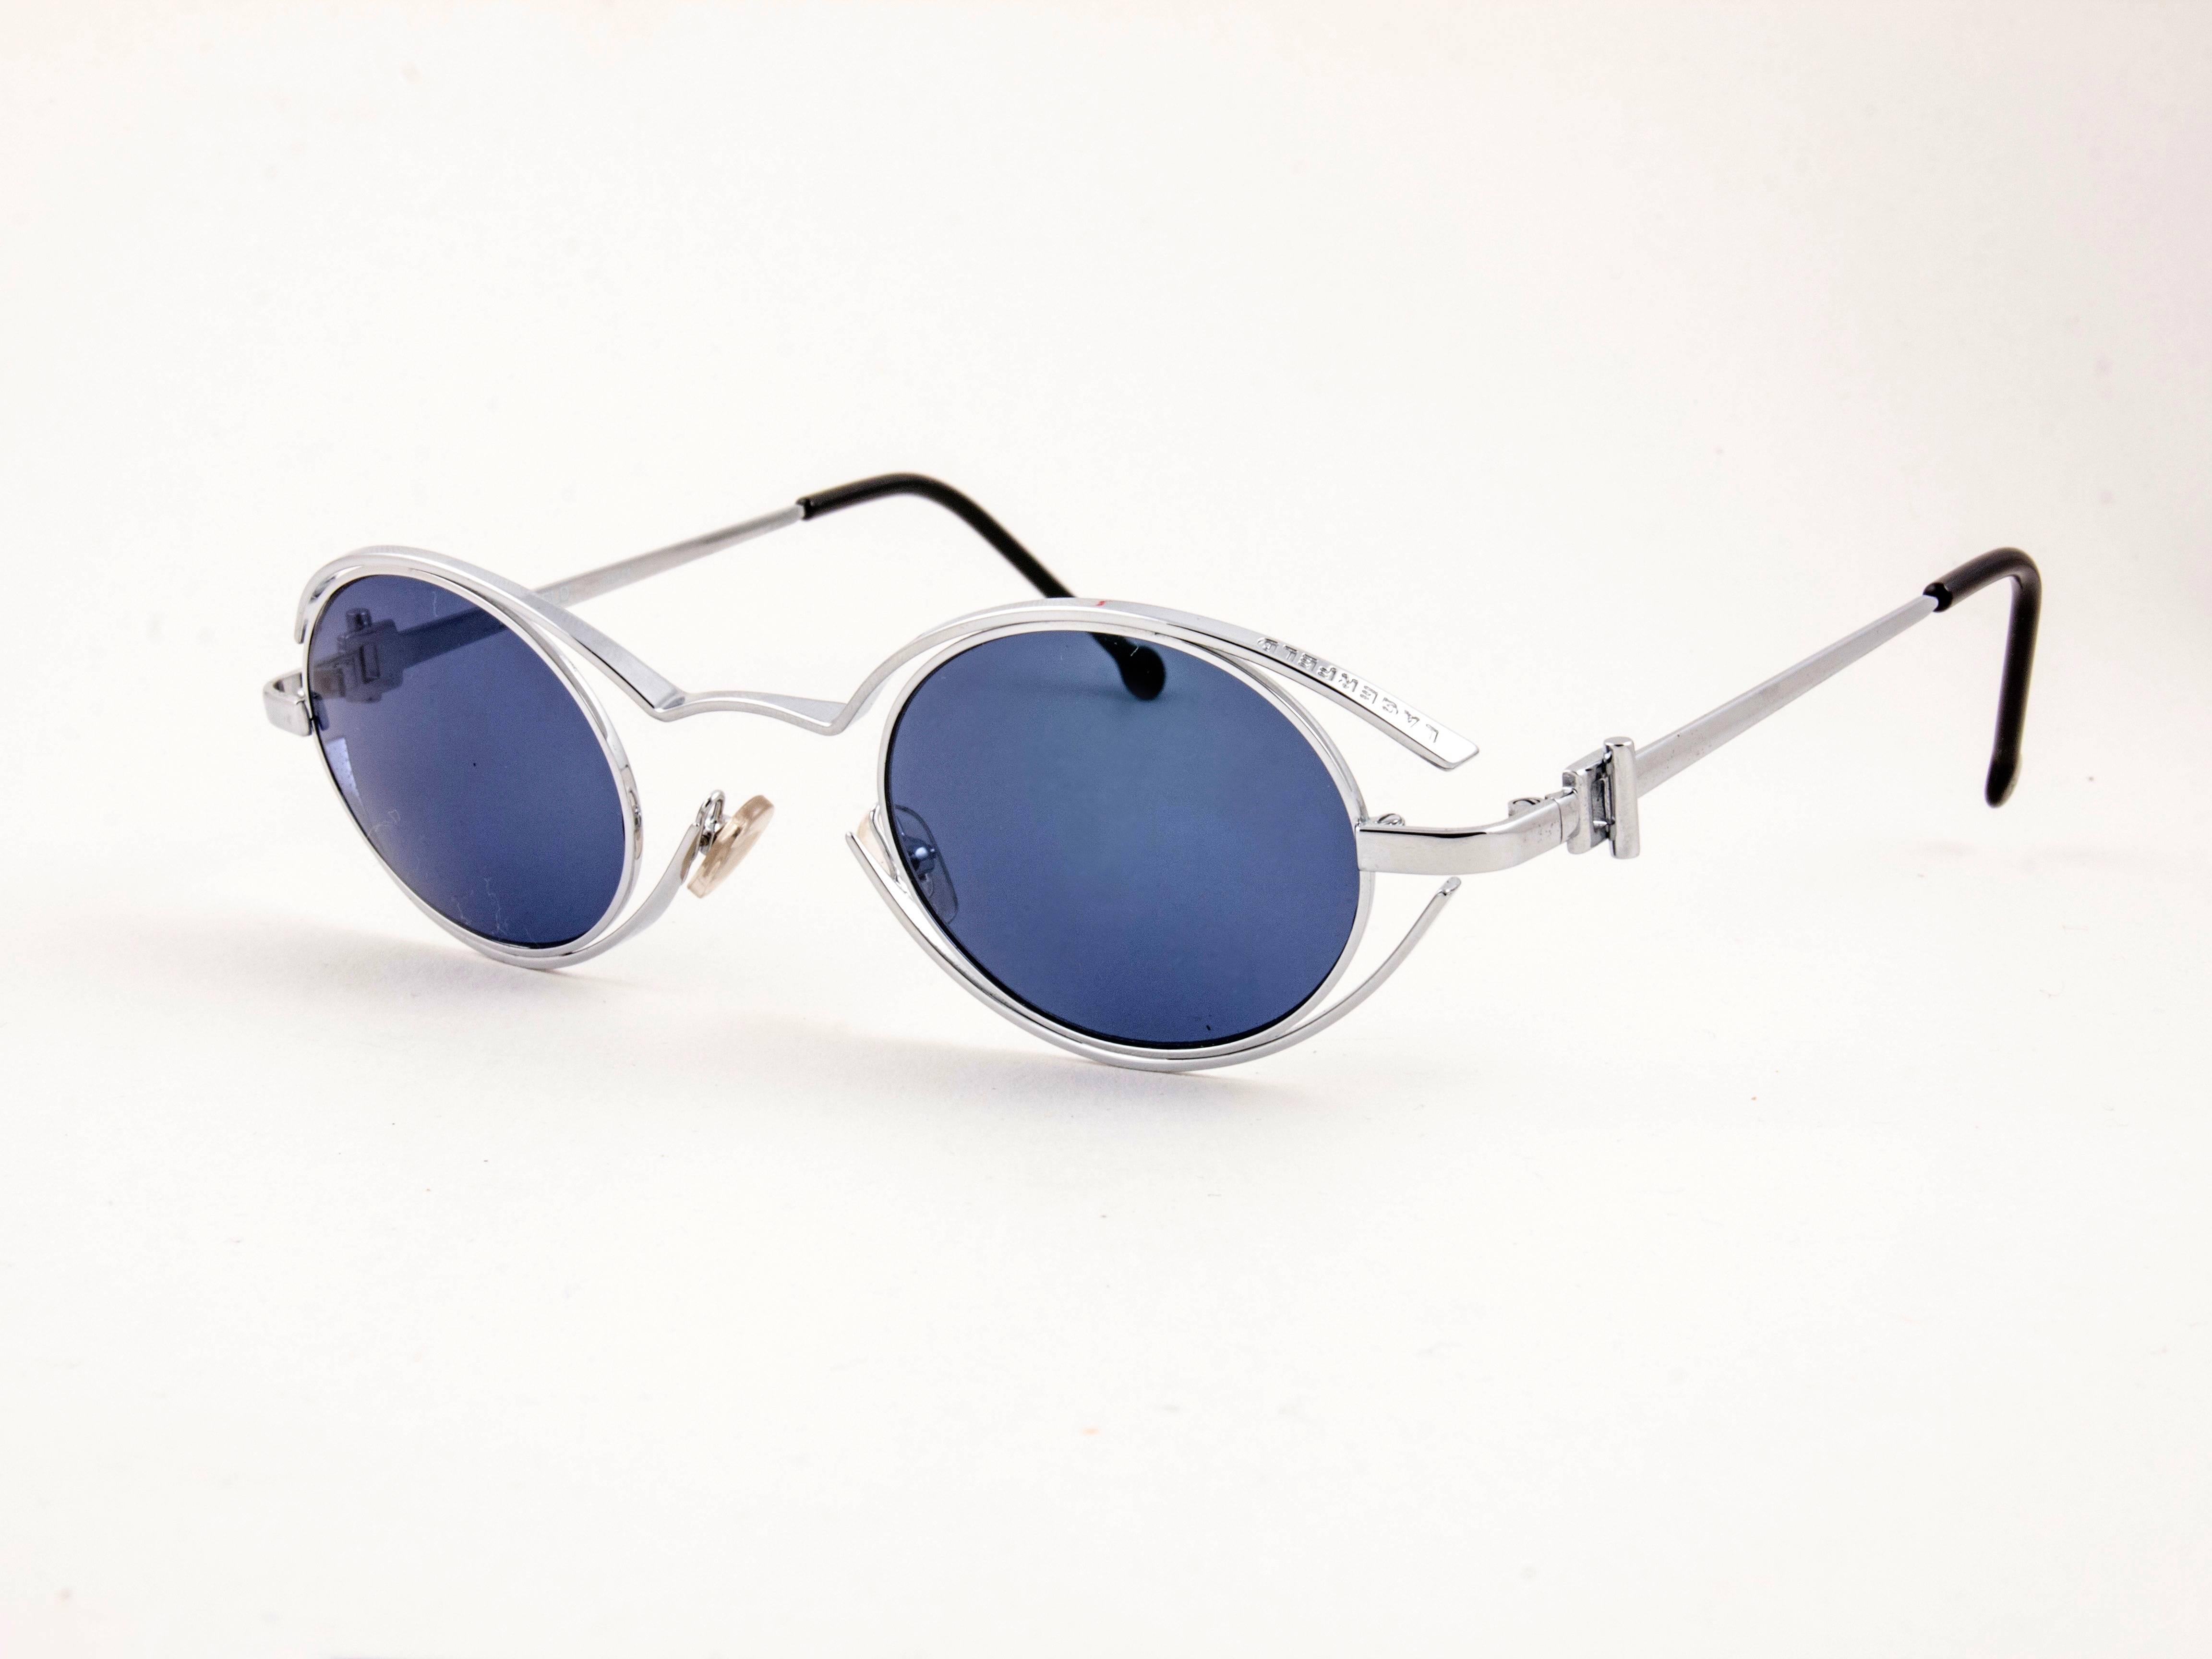 New Vintage amazing pair of vintage 1980's 4123 04 Karl Lagerfeld oval silver sunglasses framing a pair of smoke grey lenses.
 
 New, never worn or displayed. Designed and produced in France.
